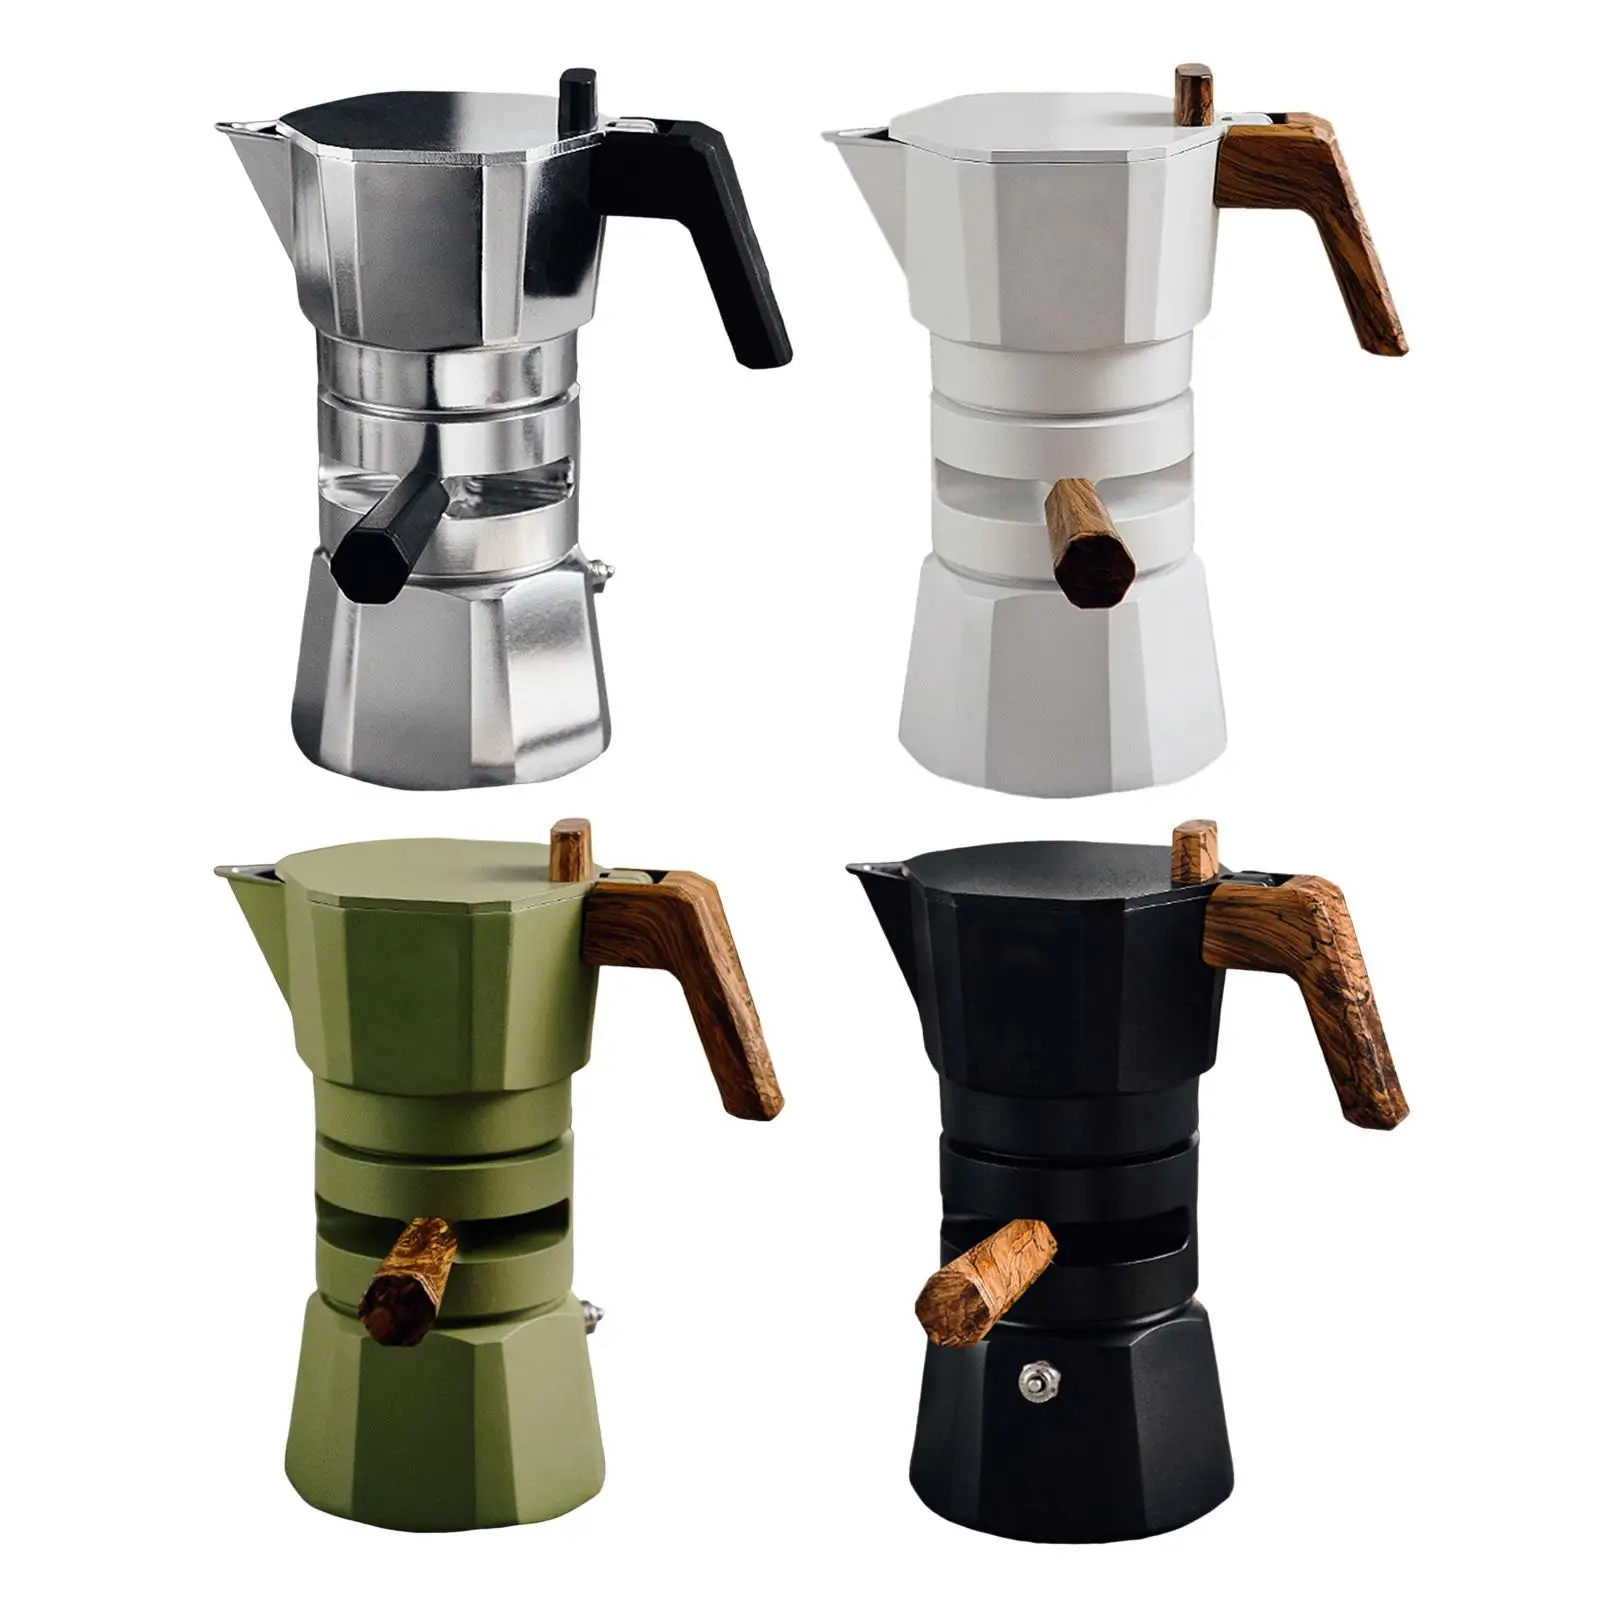 Stovetop Coffee Maker Aluminum Latte Maker for Office Camping